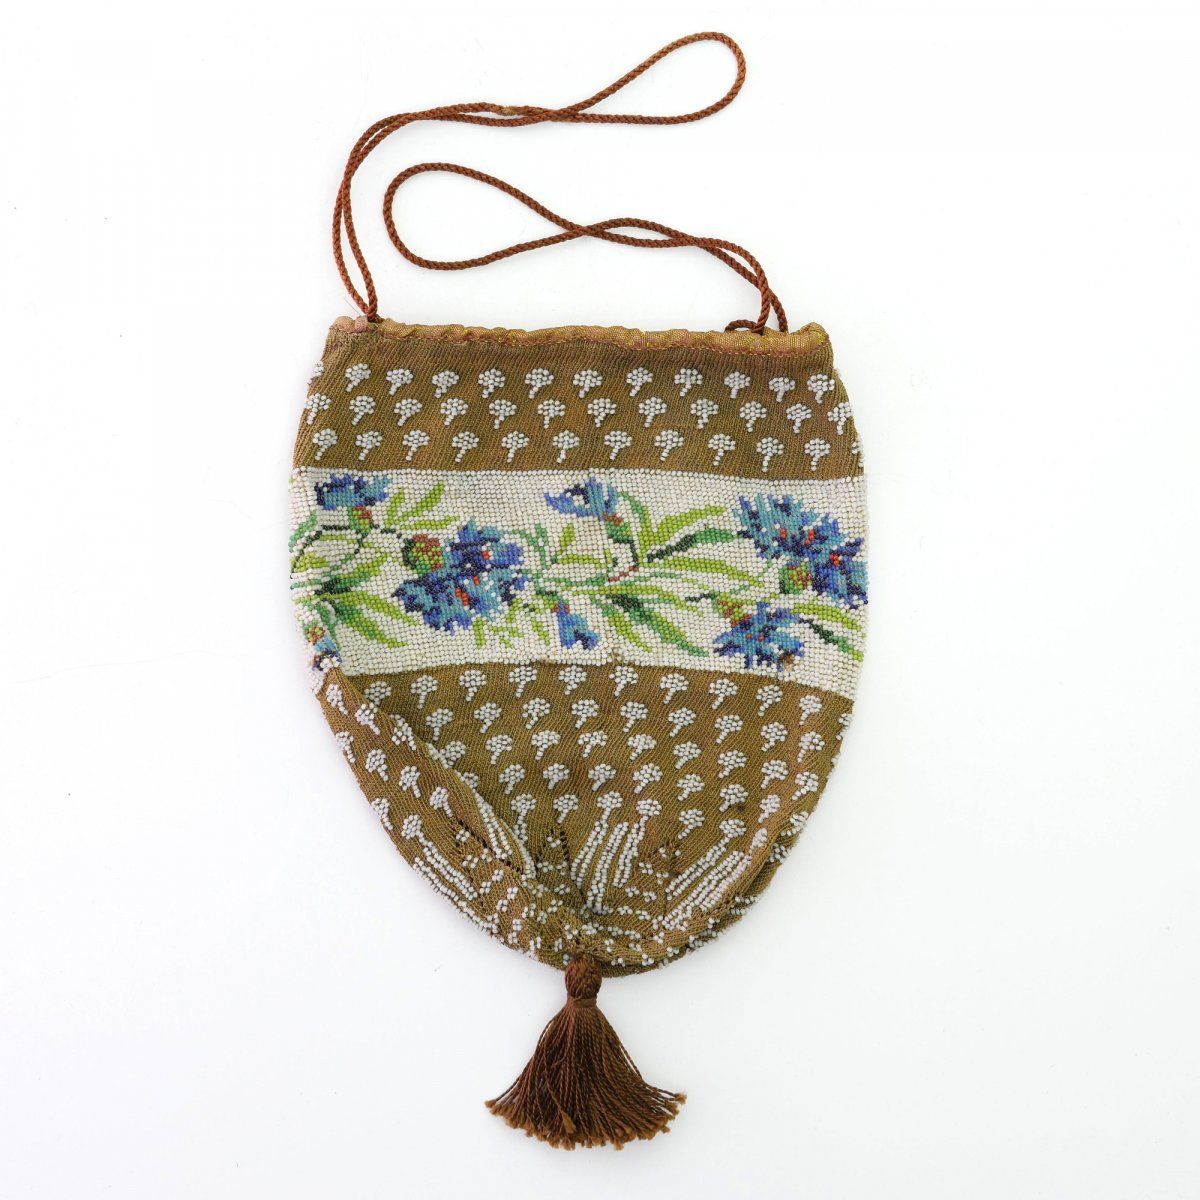 Null Pouch with floral border, c. 1830, H. 21.5 x 15 cm. Knitted, with polychrom&hellip;